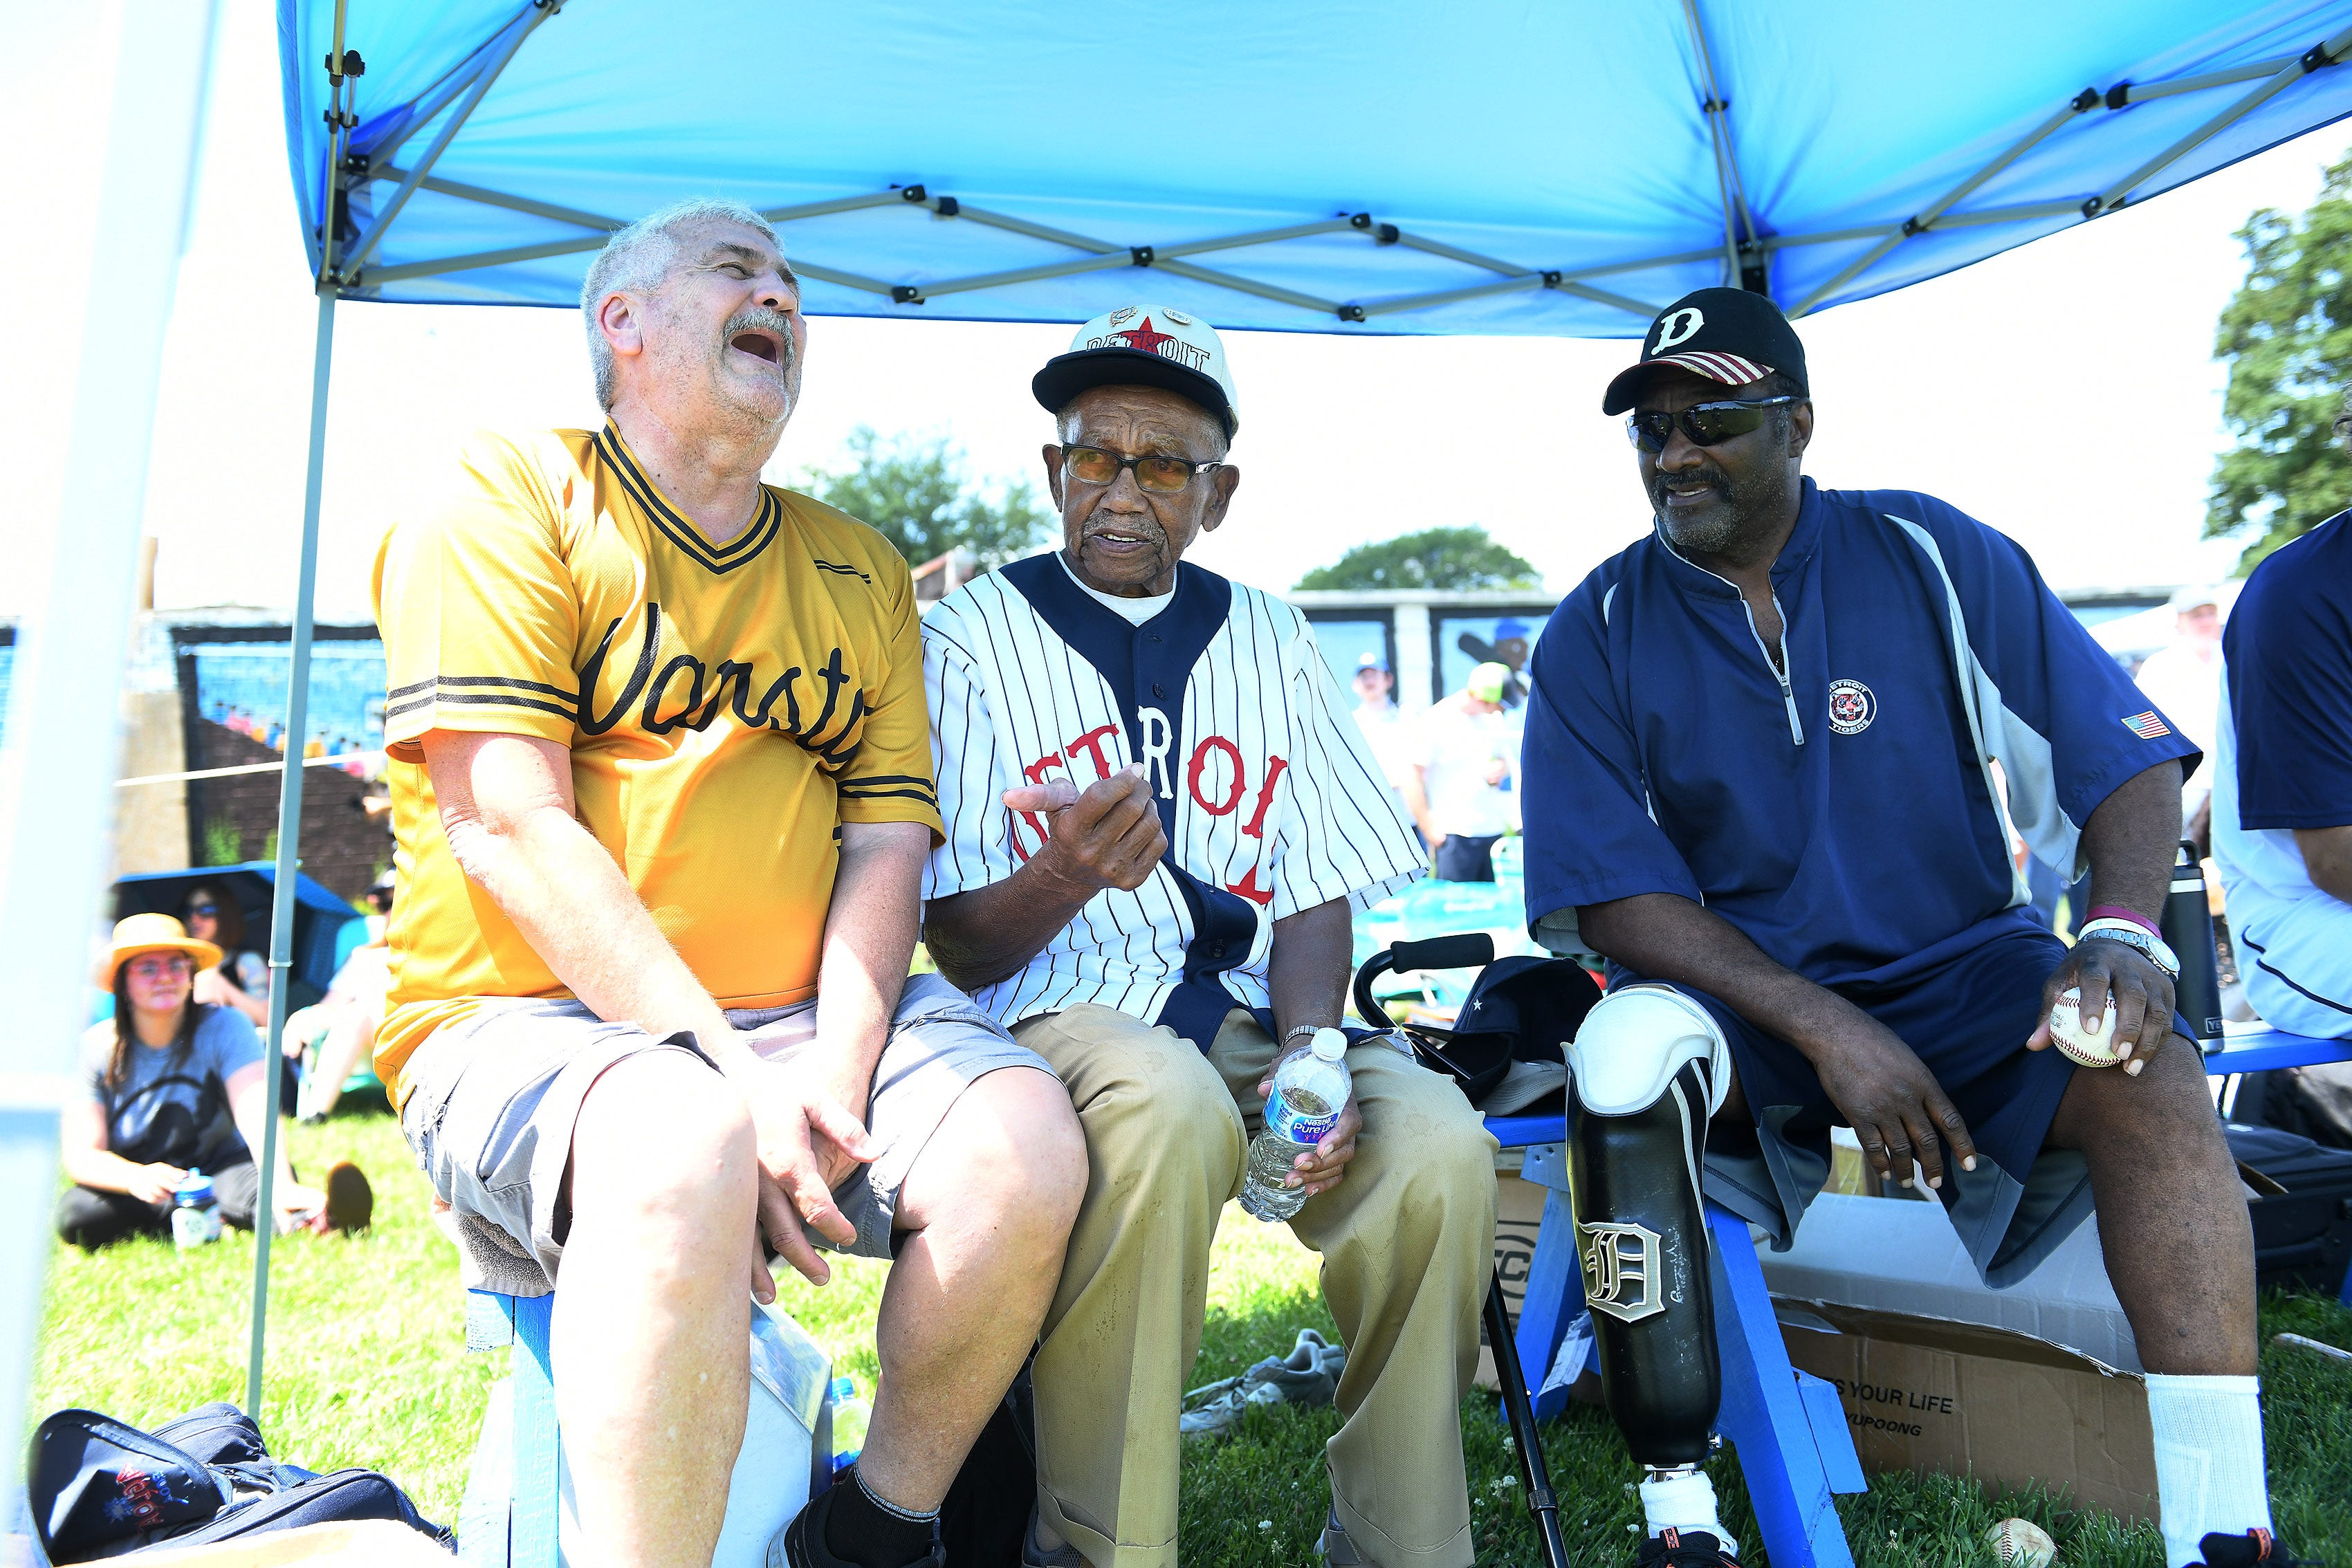 From left, Pete Celina laughs at a comment made by Ron Teasley, 92, of Detroit, who played in the Negro League, and Ike Blessitt at Hamtramck Stadium during a charity match with the Jack White and friends to benefit the Friends of Historic Hamtramck Stadium on July 11, 2019. Blessitt played with the Detroit Tigers and many years in Mexico.